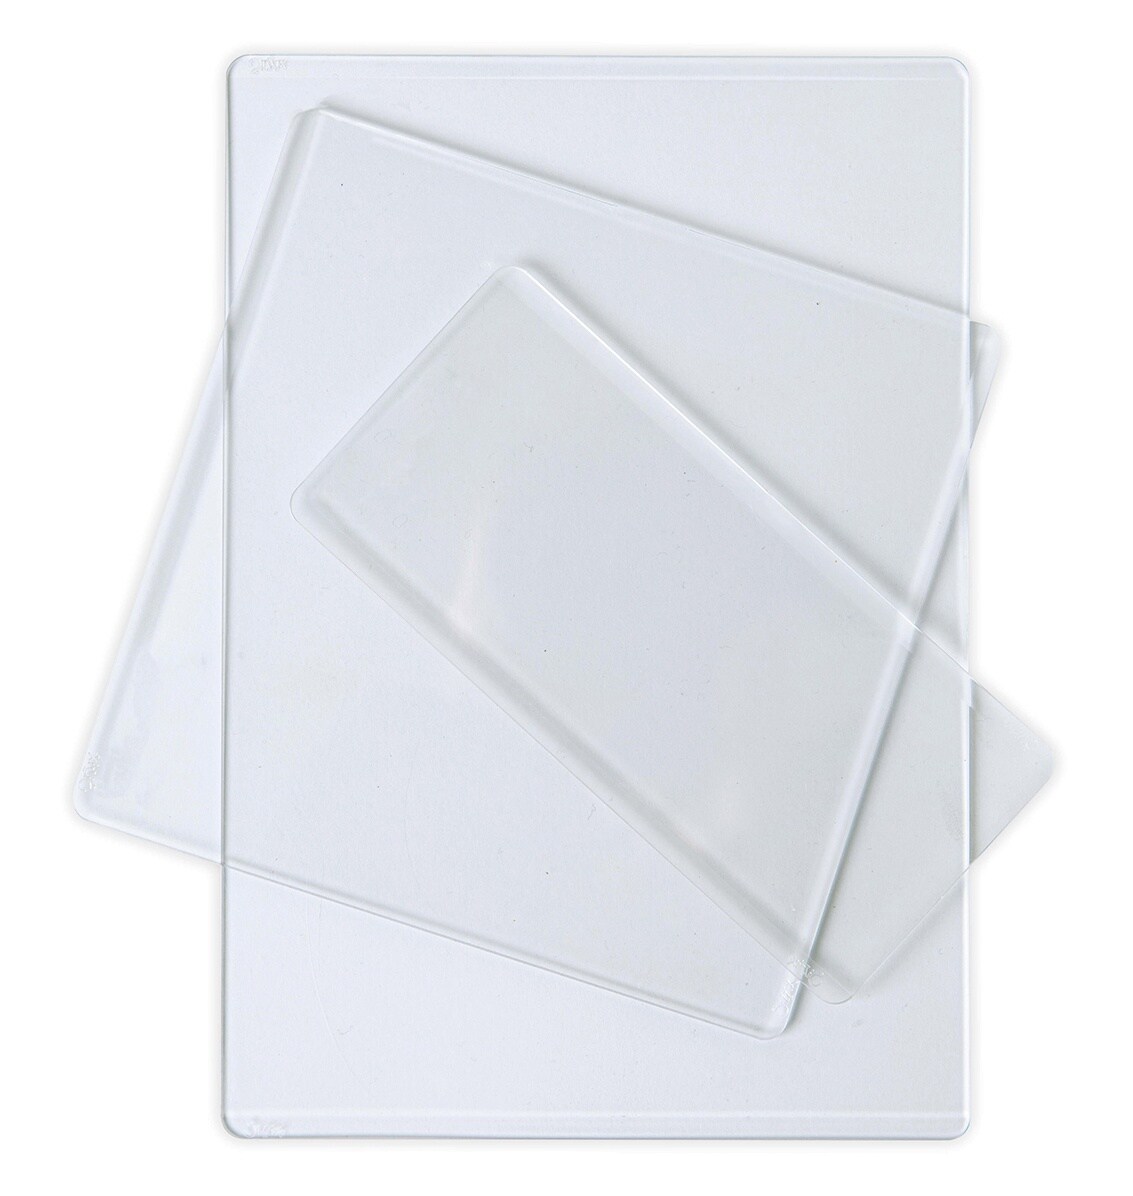 Sizzix Accessory Cutting Pads 1 Pair-Multipack